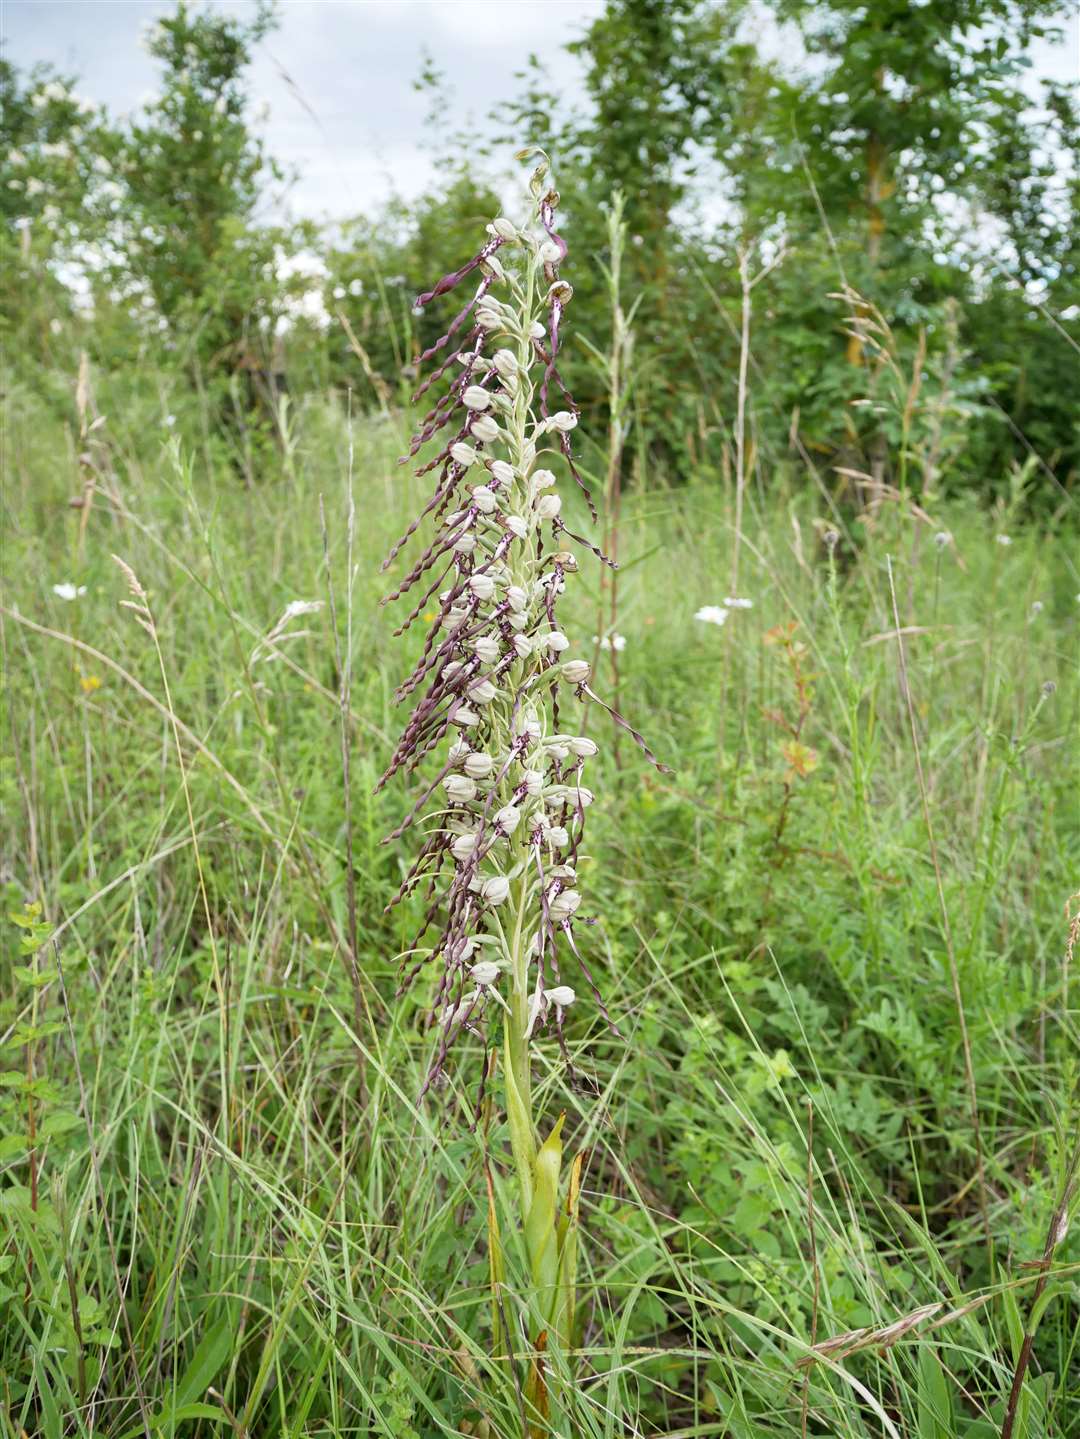 The rare lizard orchid has been found growing on a railway embankment on the HS1 line between Chatham and Bromley. It is the first time it's been found growing in the area for 100 years. Picture: HS1 Ltd